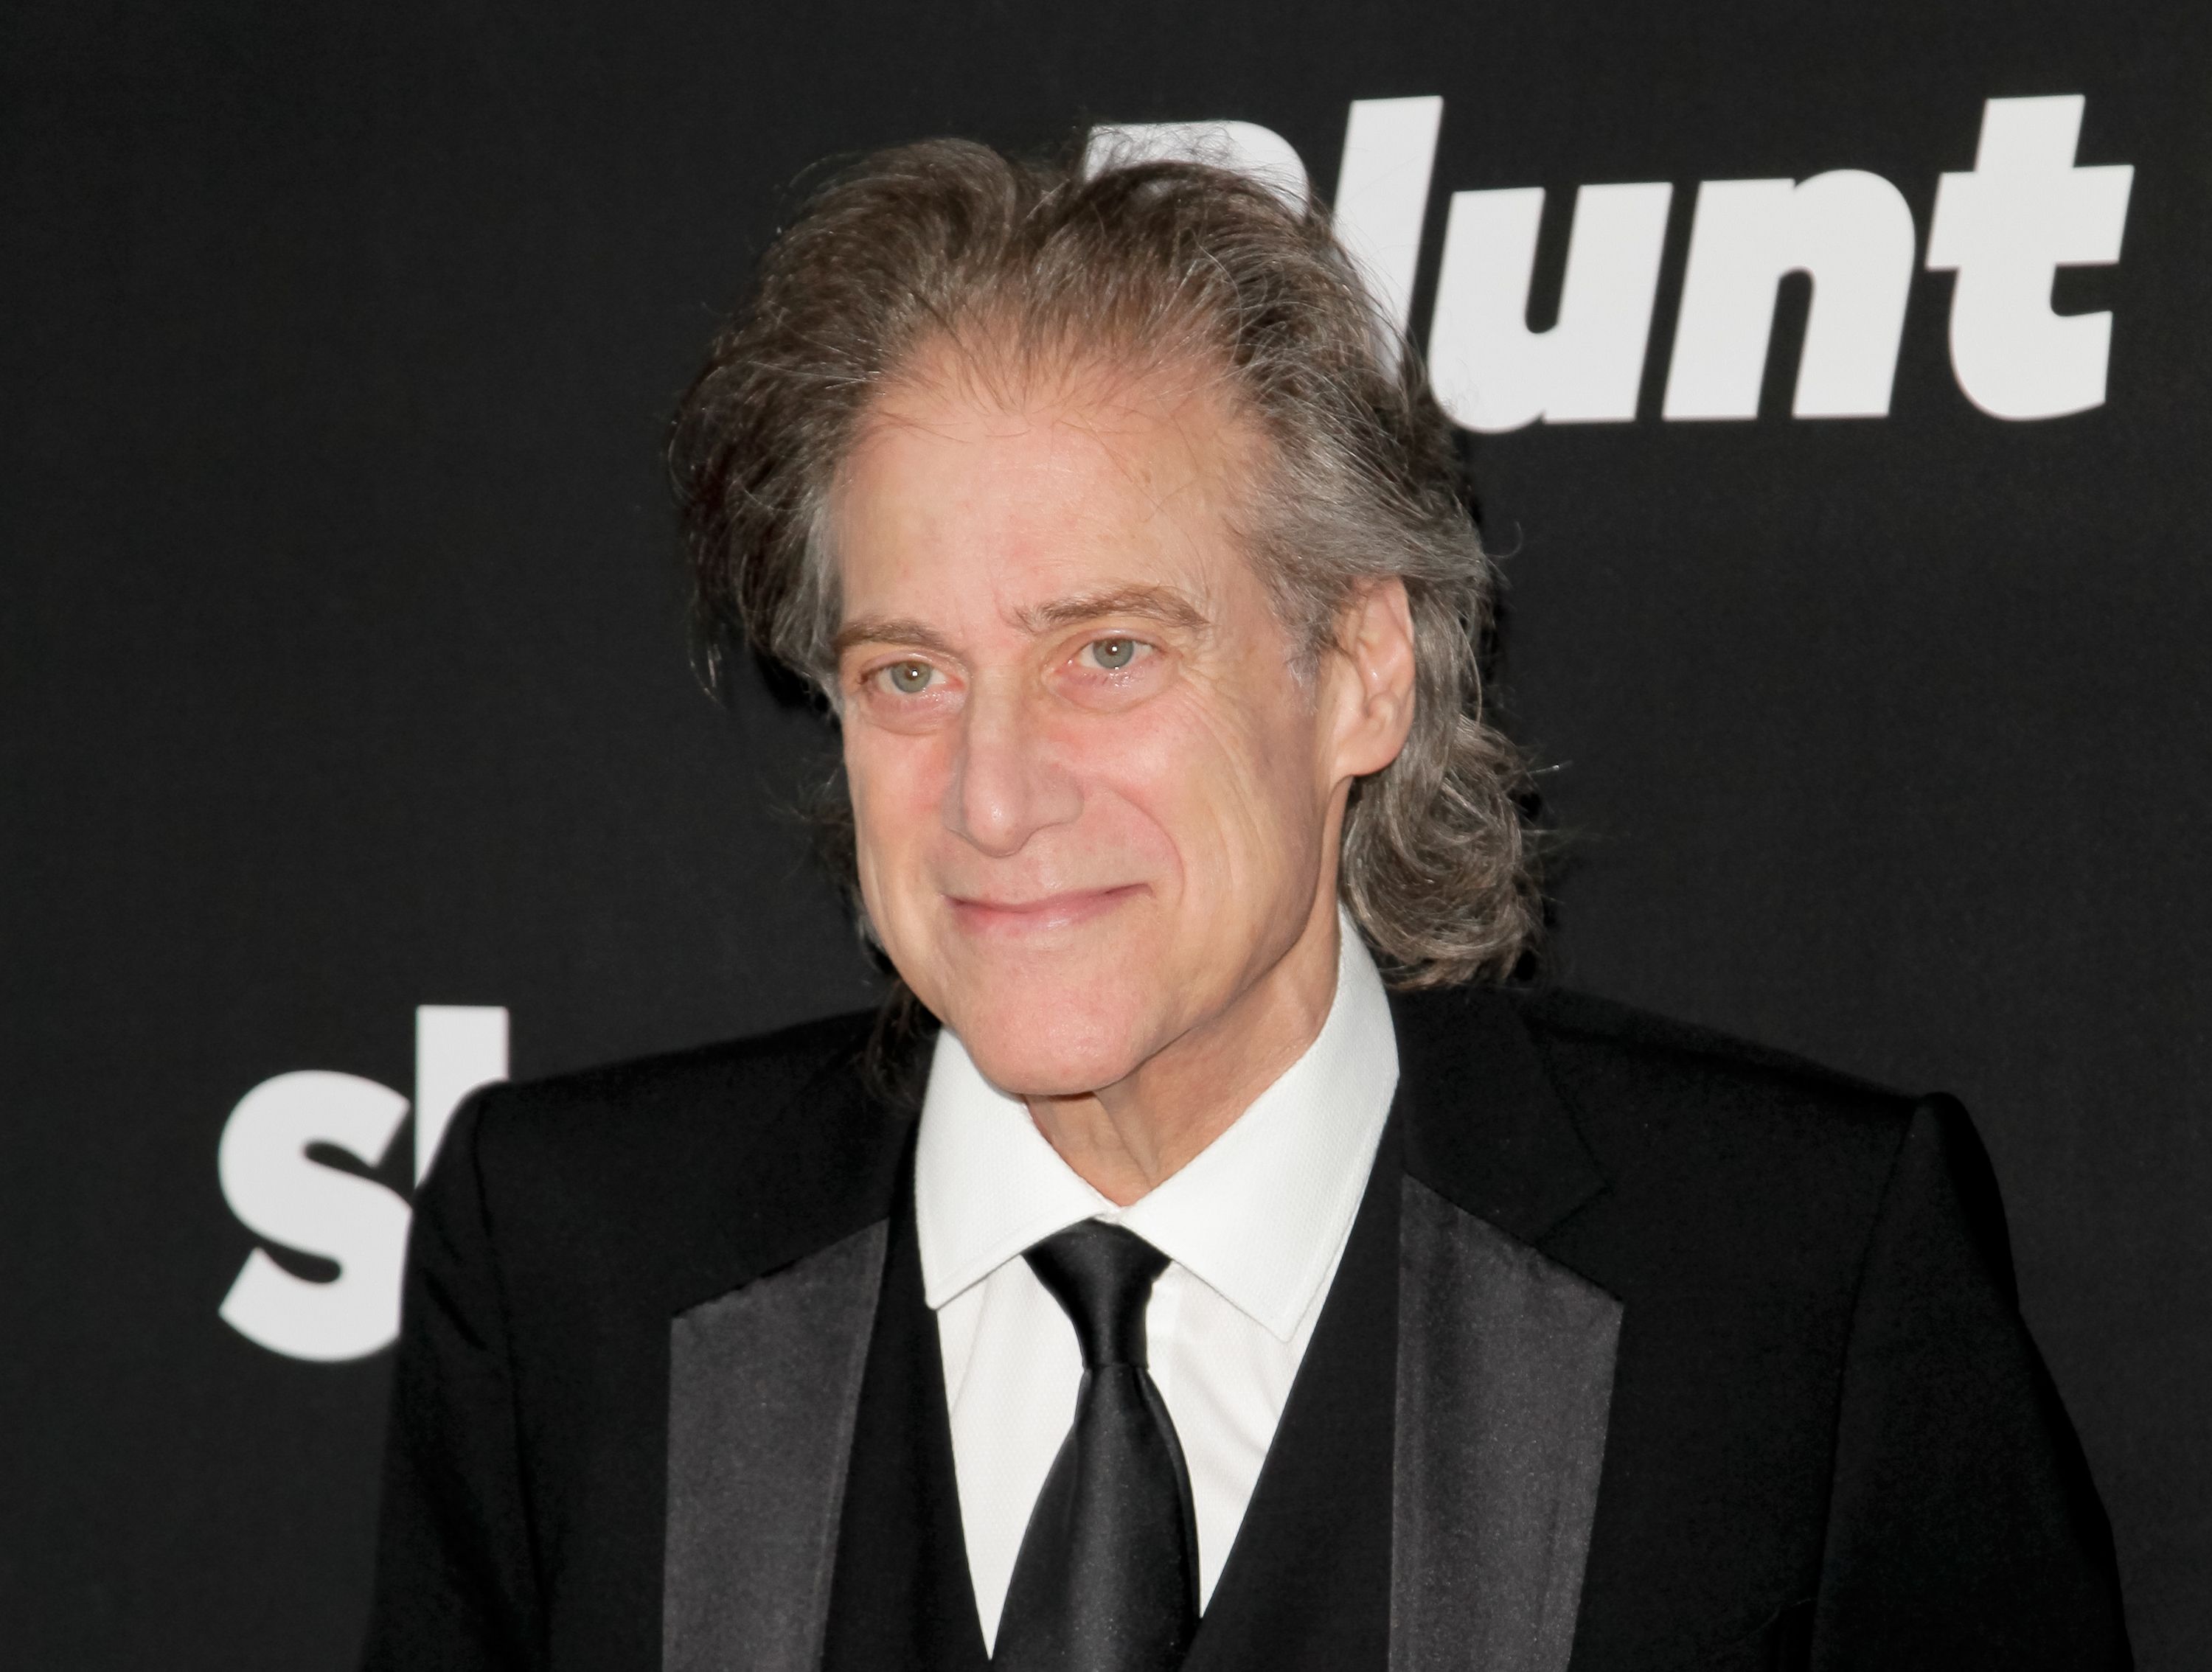 Richard Lewis during the premiere of STARZ 'Blunt Talk' at DGA Theater on August 10, 2015, in Los Angeles, California. | Source: Getty Images